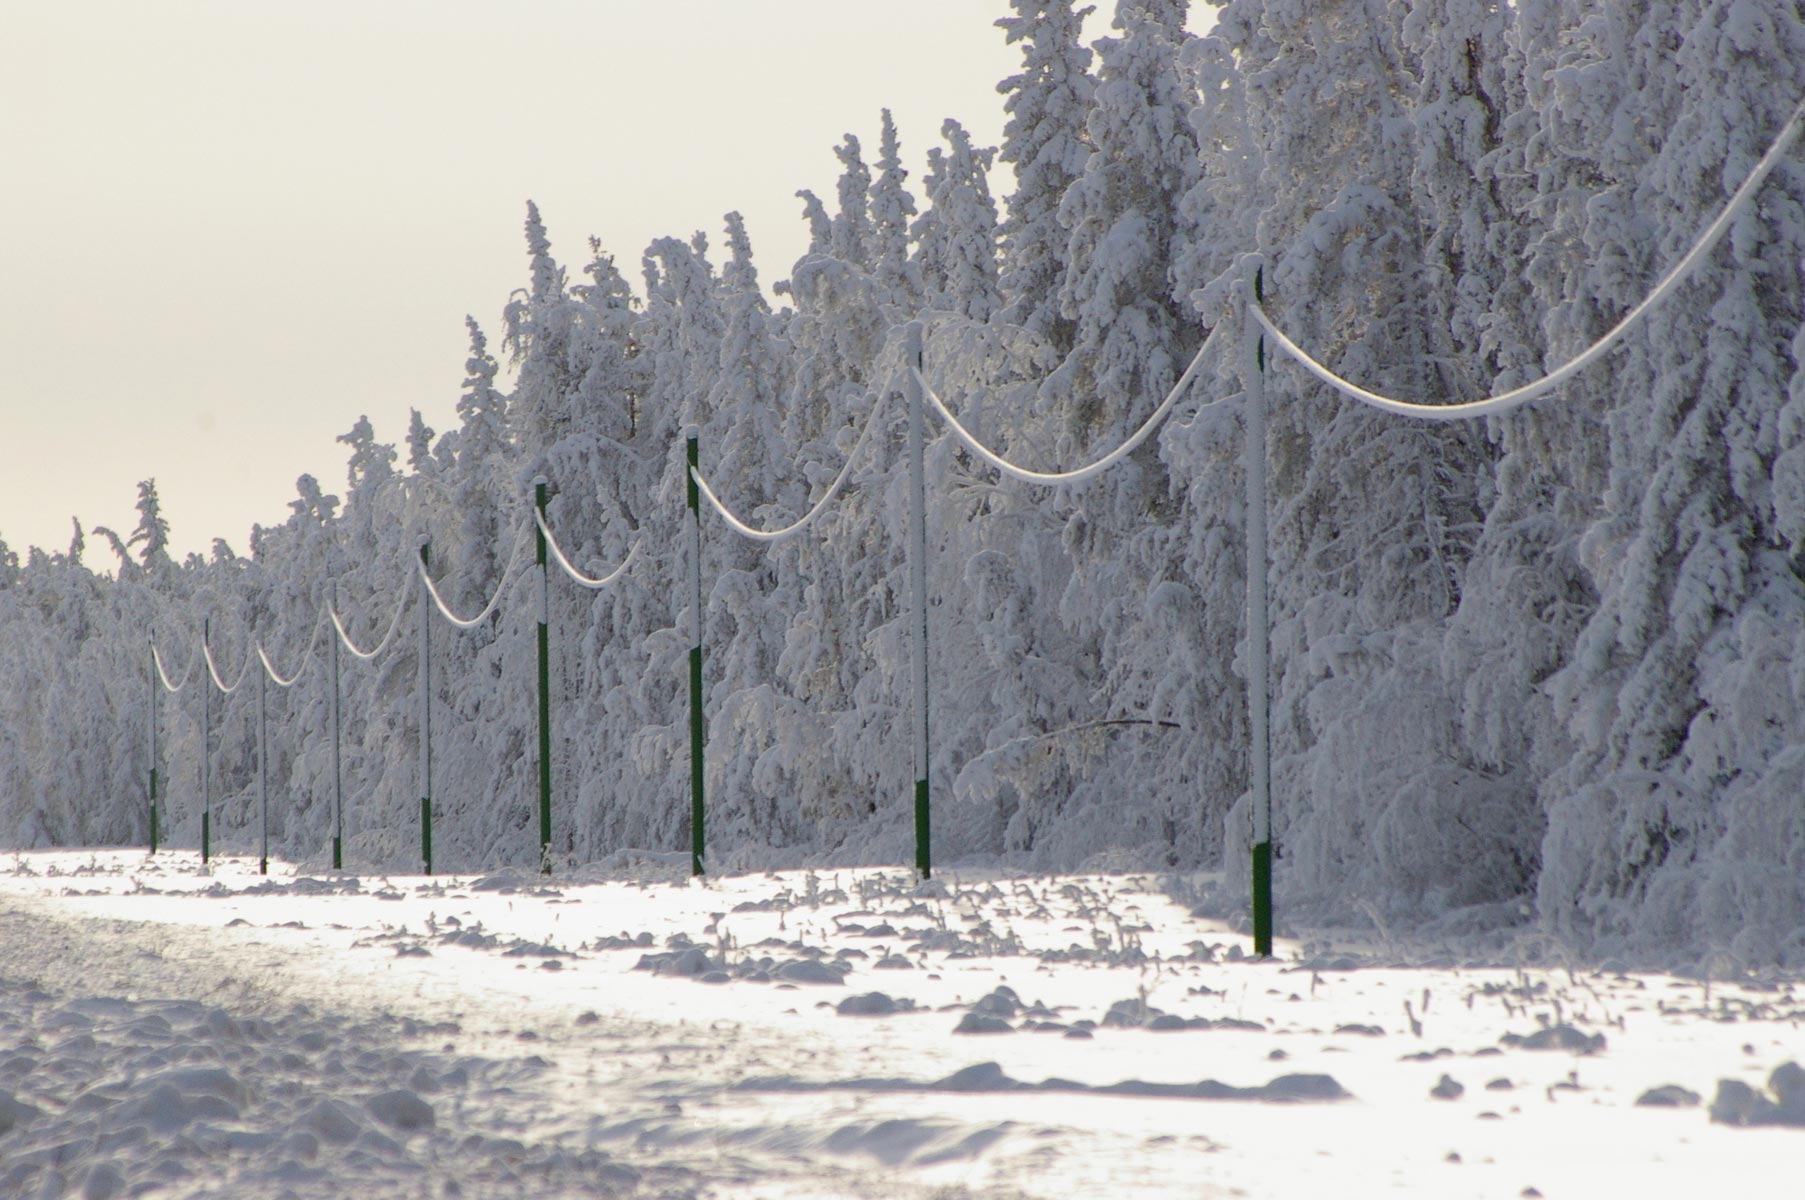 RS composite poles installed for NorthwesTel initiative